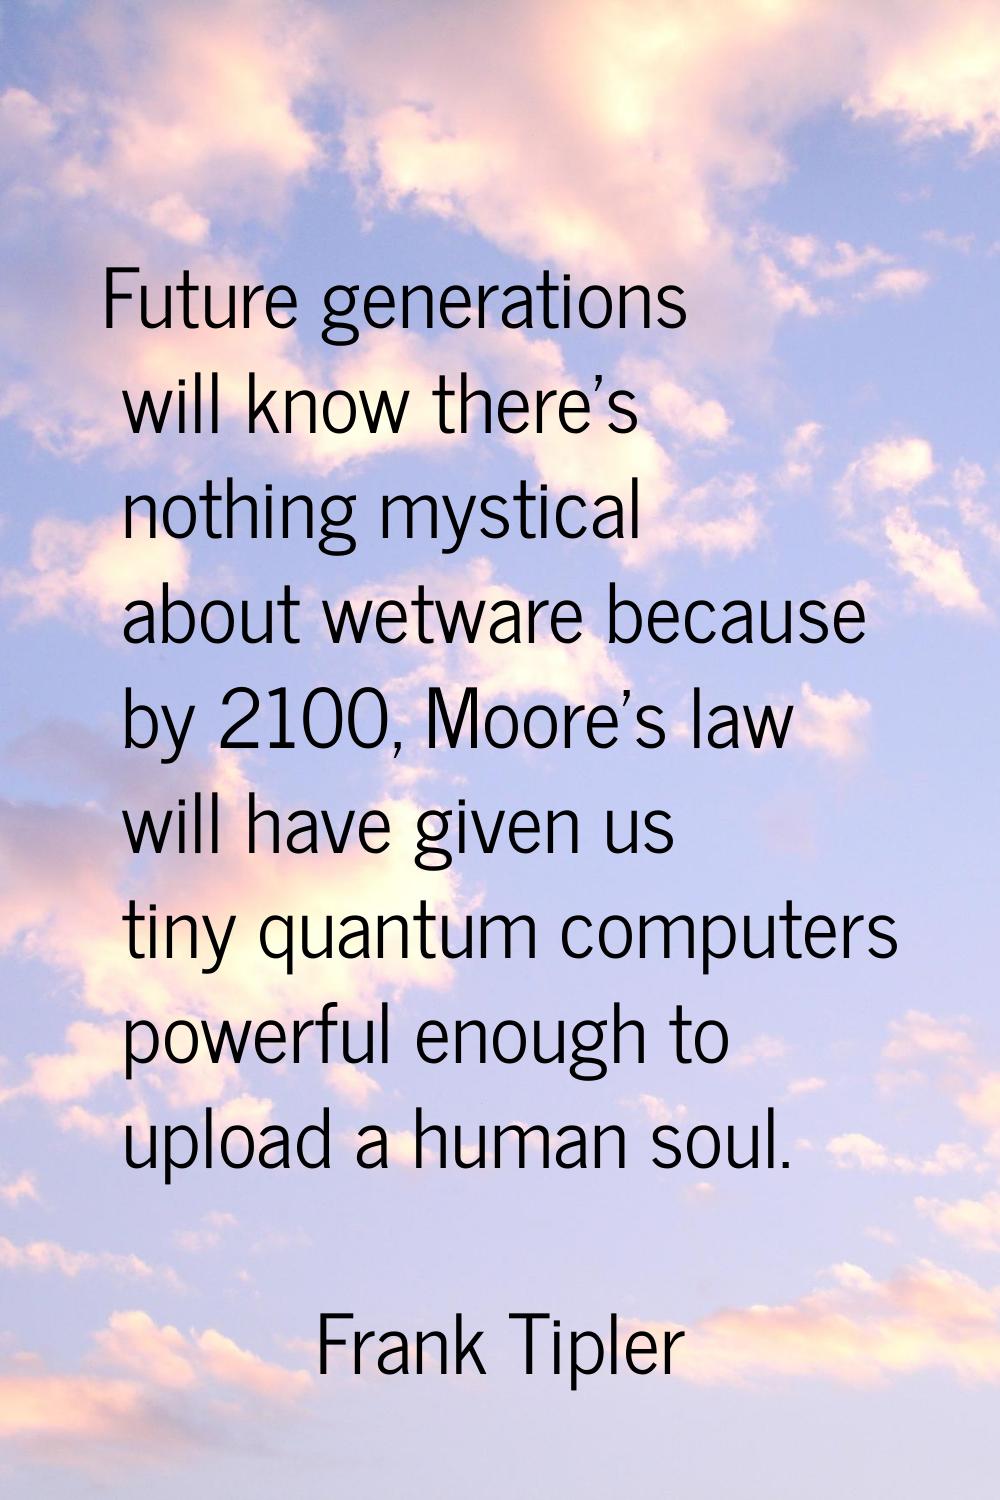 Future generations will know there's nothing mystical about wetware because by 2100, Moore's law wi